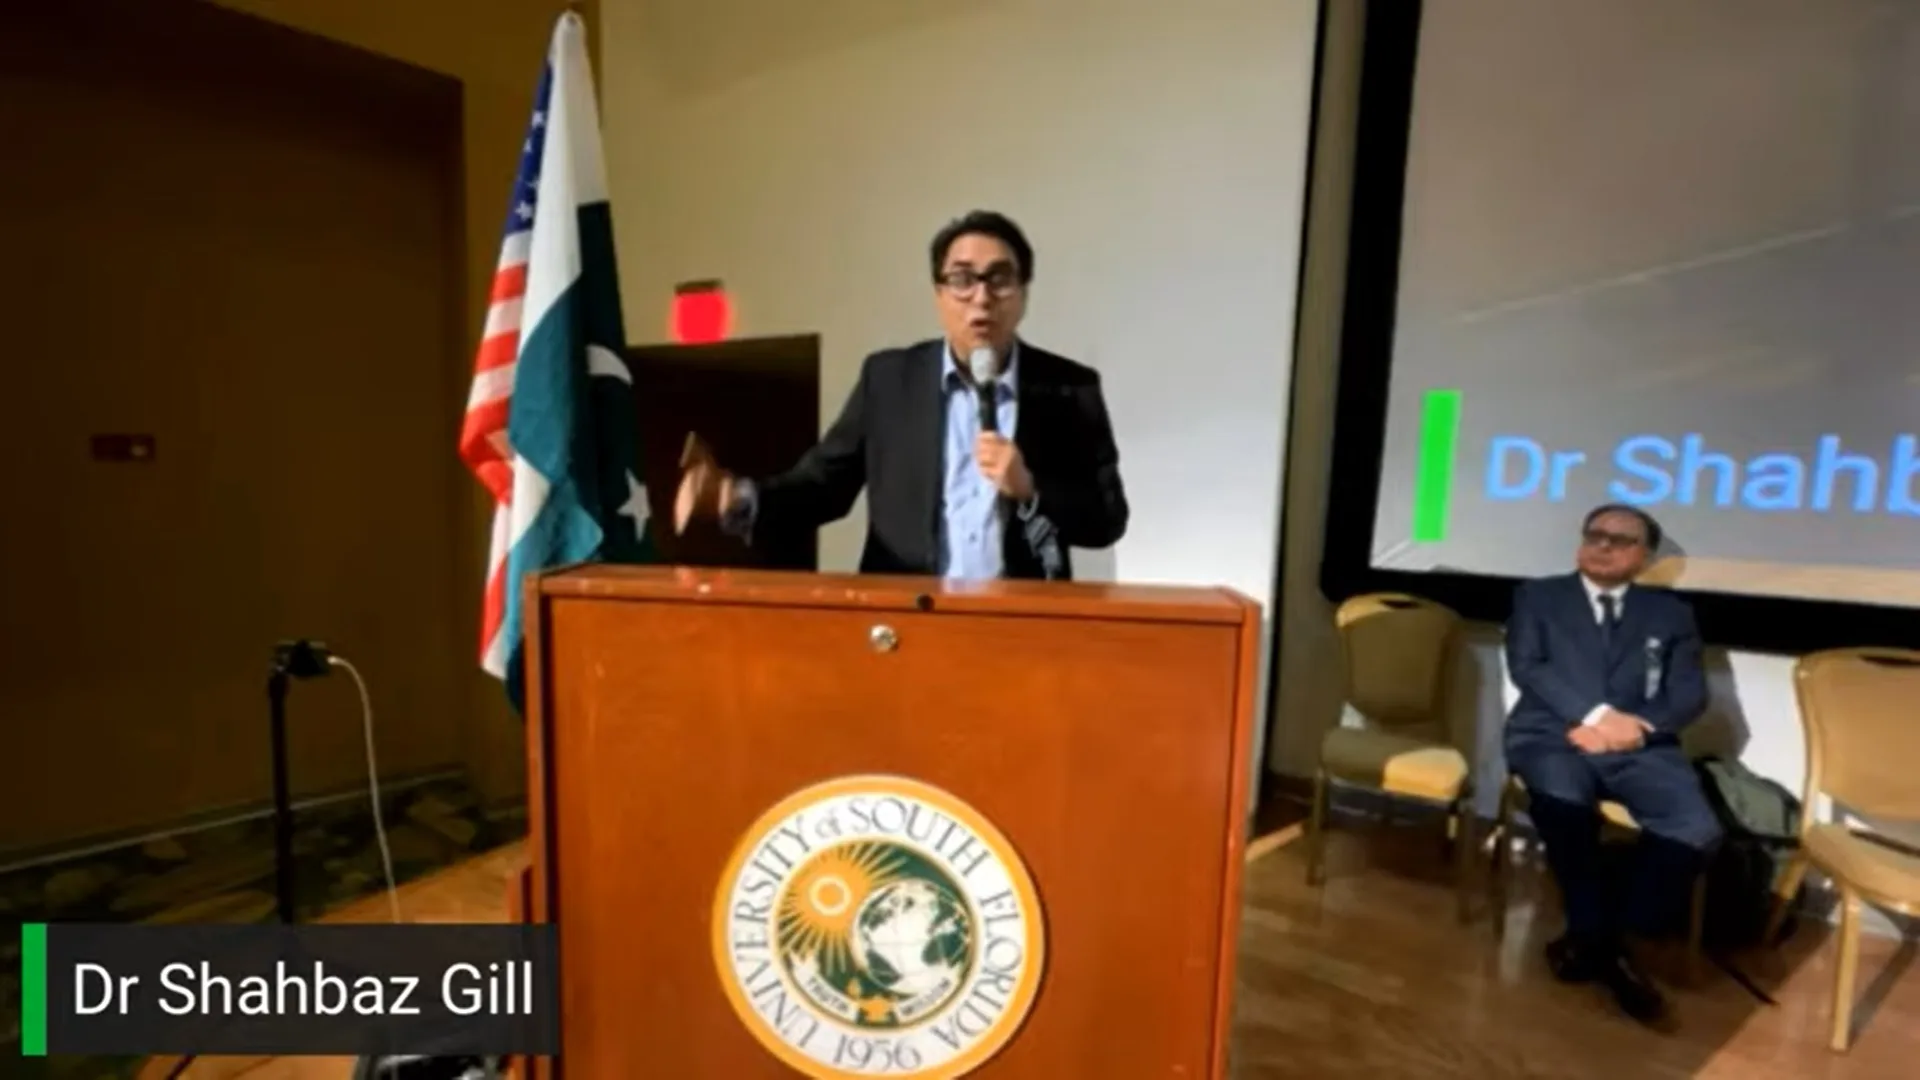 Shahbaz Gill embarrasses Moeed Pirzada in his speech at University of South Florida